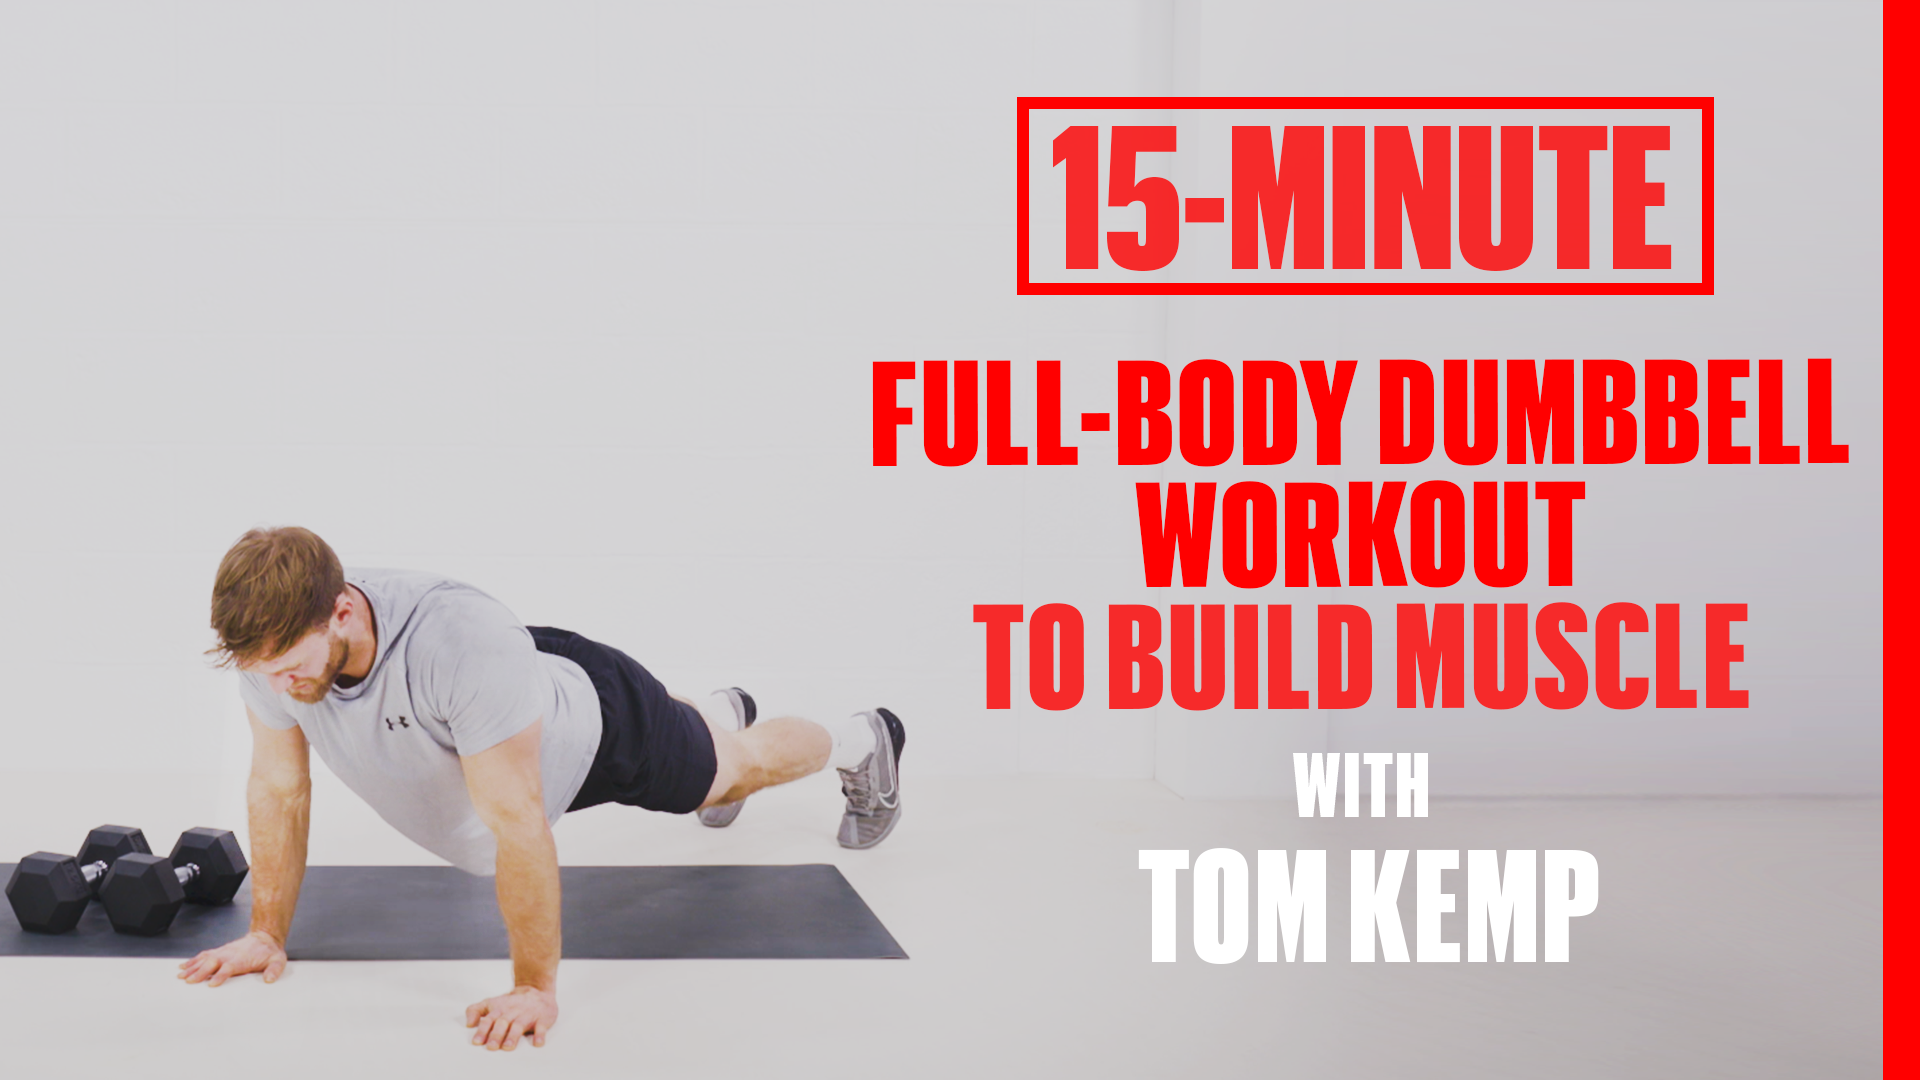 At Home Workouts for Men - 10 Muscle Building Workouts